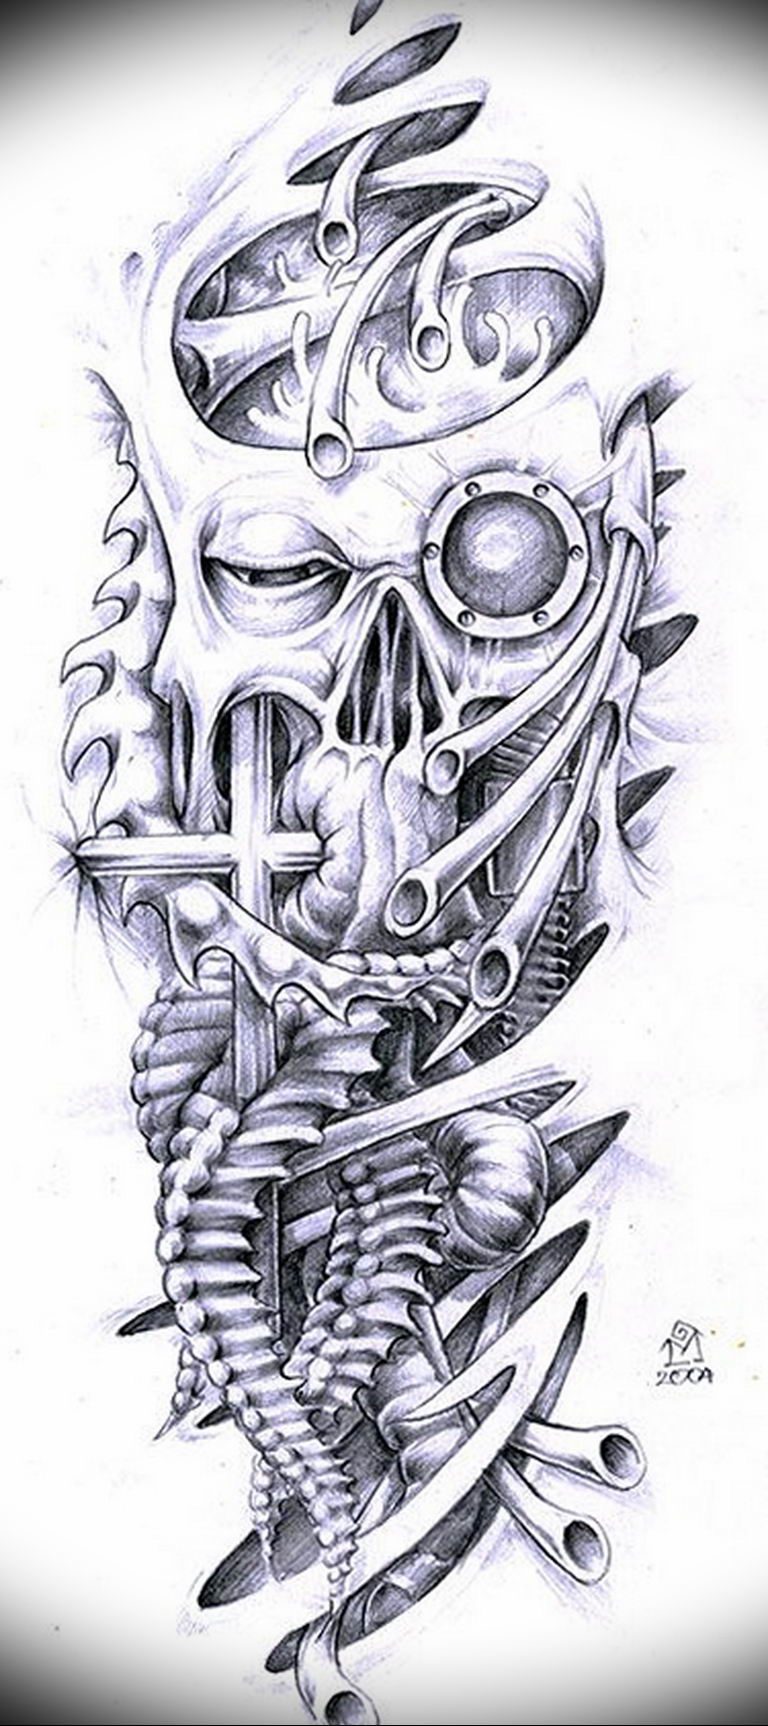 Biomechanical designs  vector illustration Tattoo design in biomechanical  style vinylready  CanStock